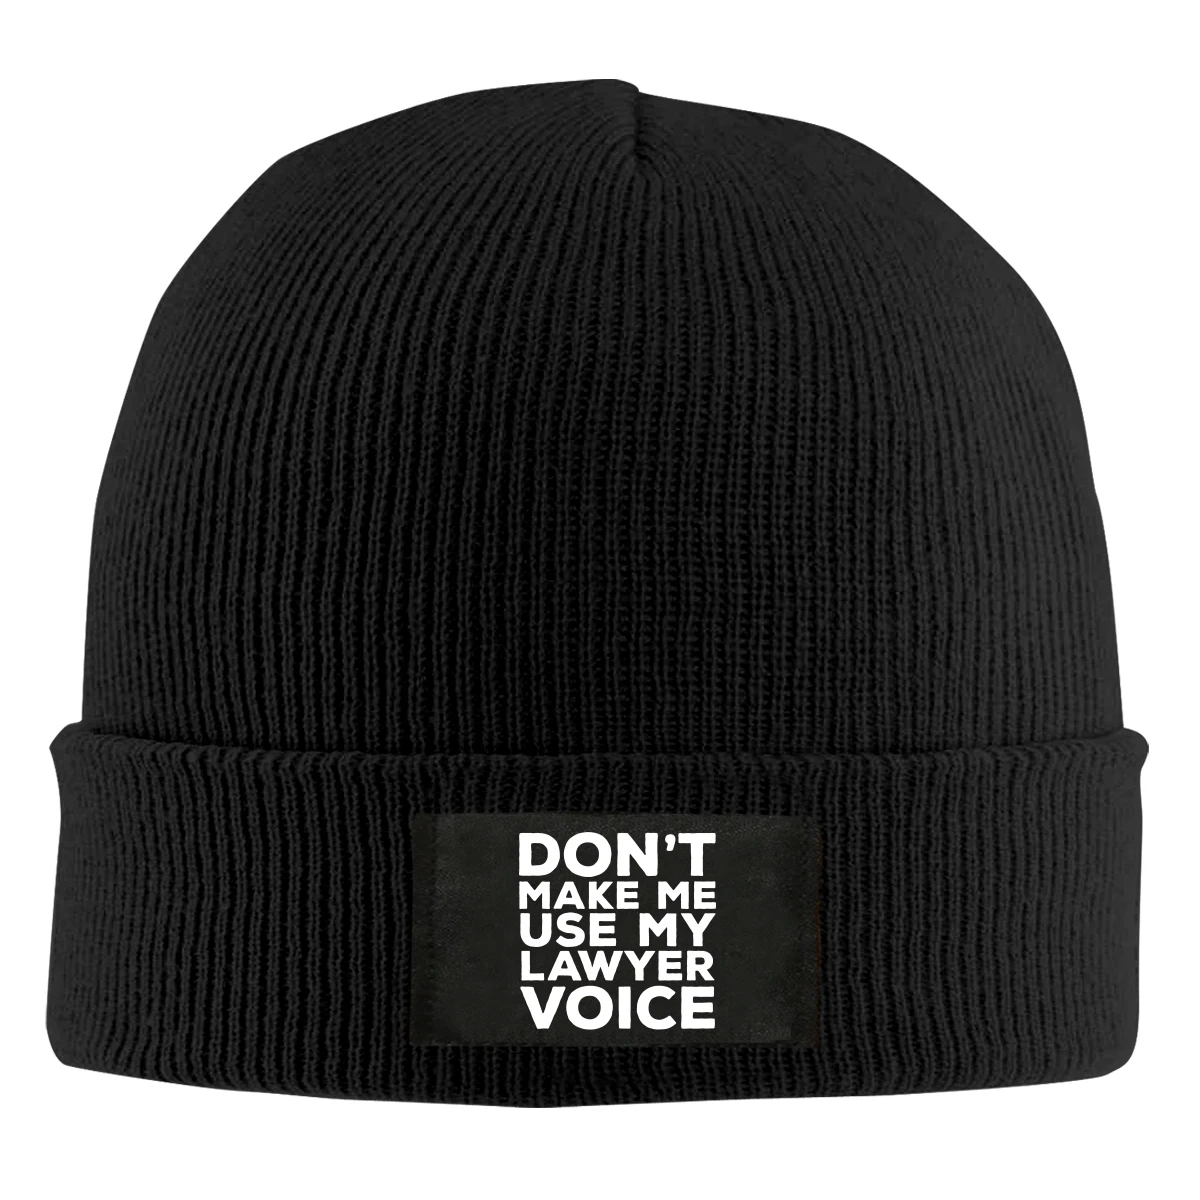 

Don't Make Me Use My Lawyer Voice Beanie Hats For Men Women With Designs Winter Slouchy Knit Skull Cap